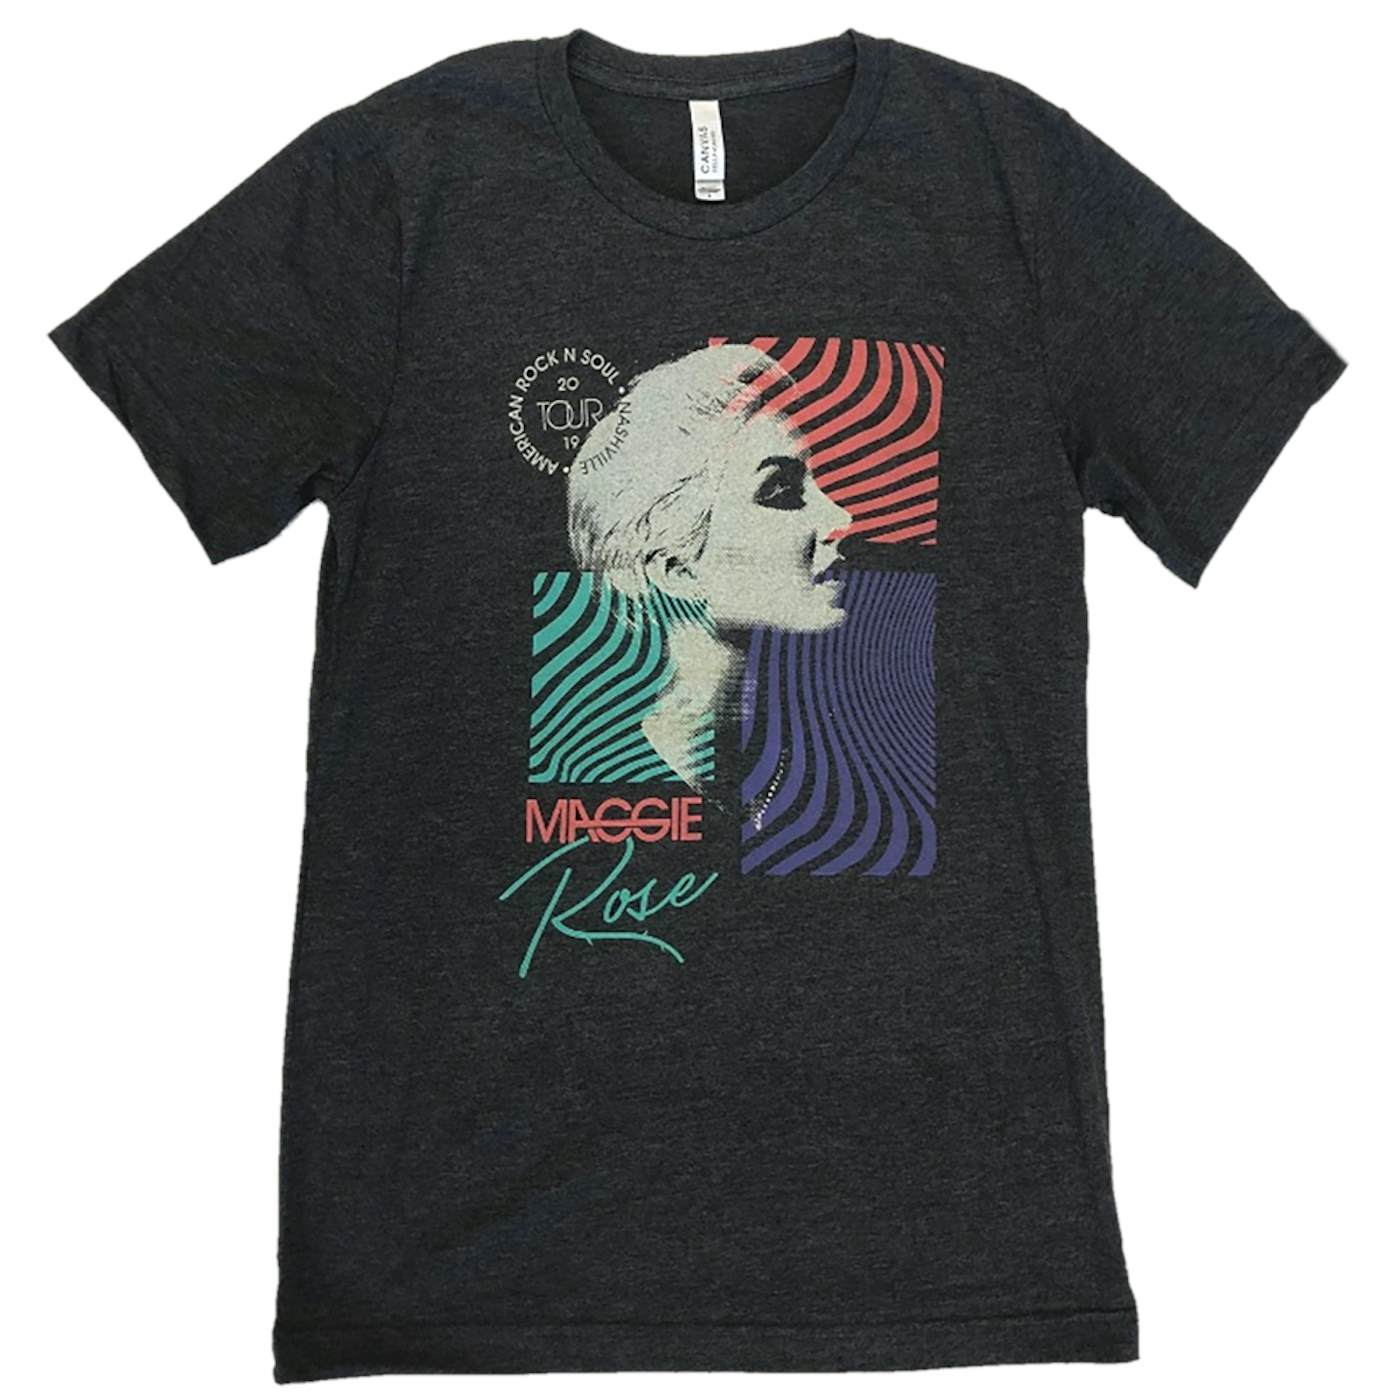 Maggie Rose 2019 AMERICAN ROCK N SOUL TOUR TEE (SM ONLY)